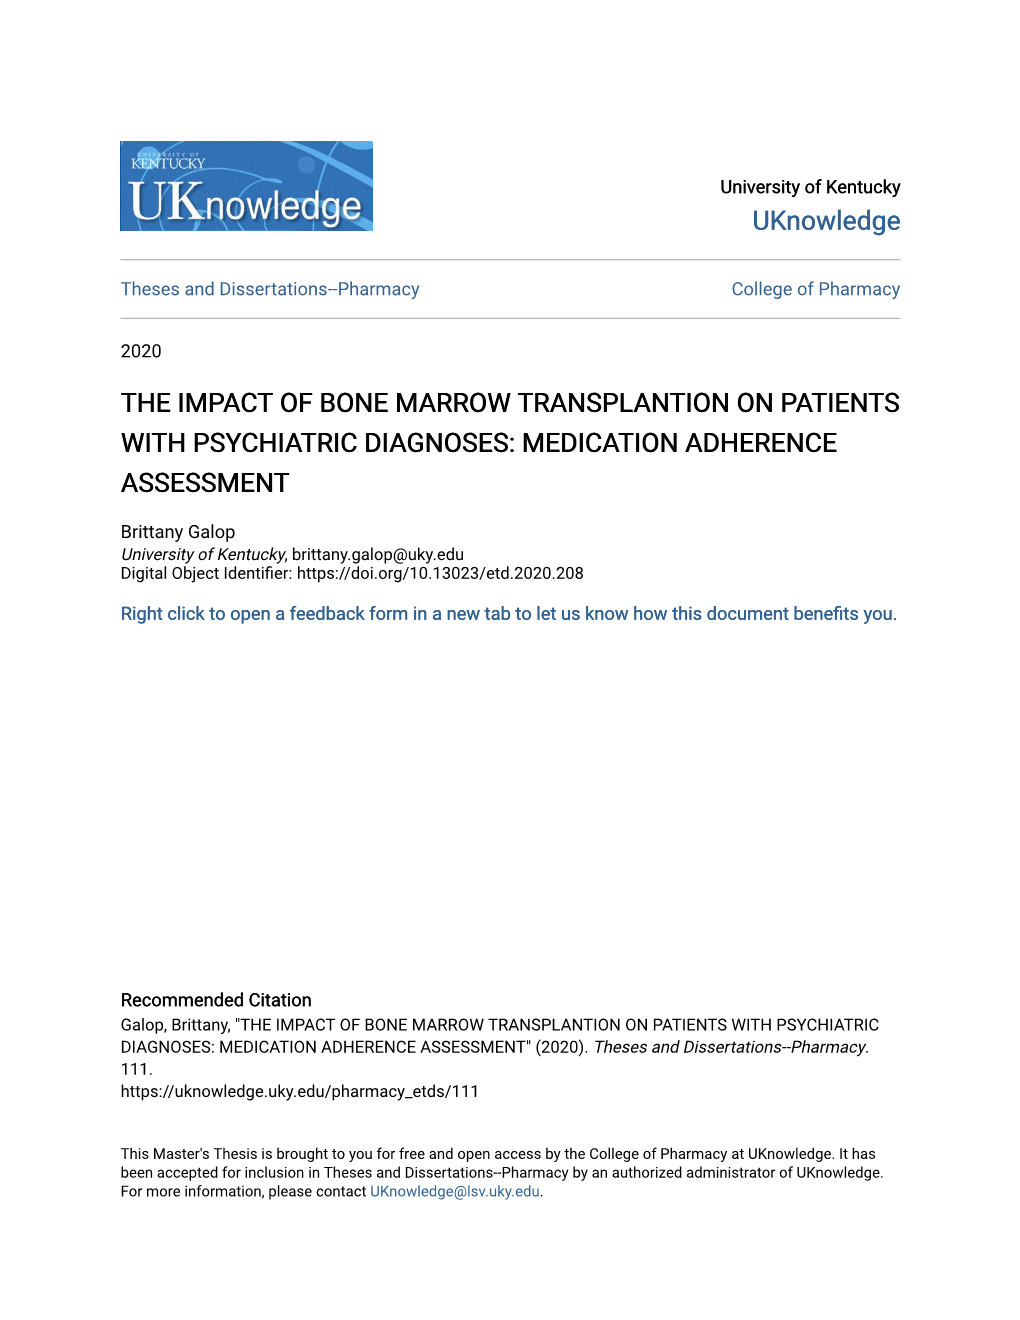 The Impact of Bone Marrow Transplantion on Patients with Psychiatric Diagnoses: Medication Adherence Assessment